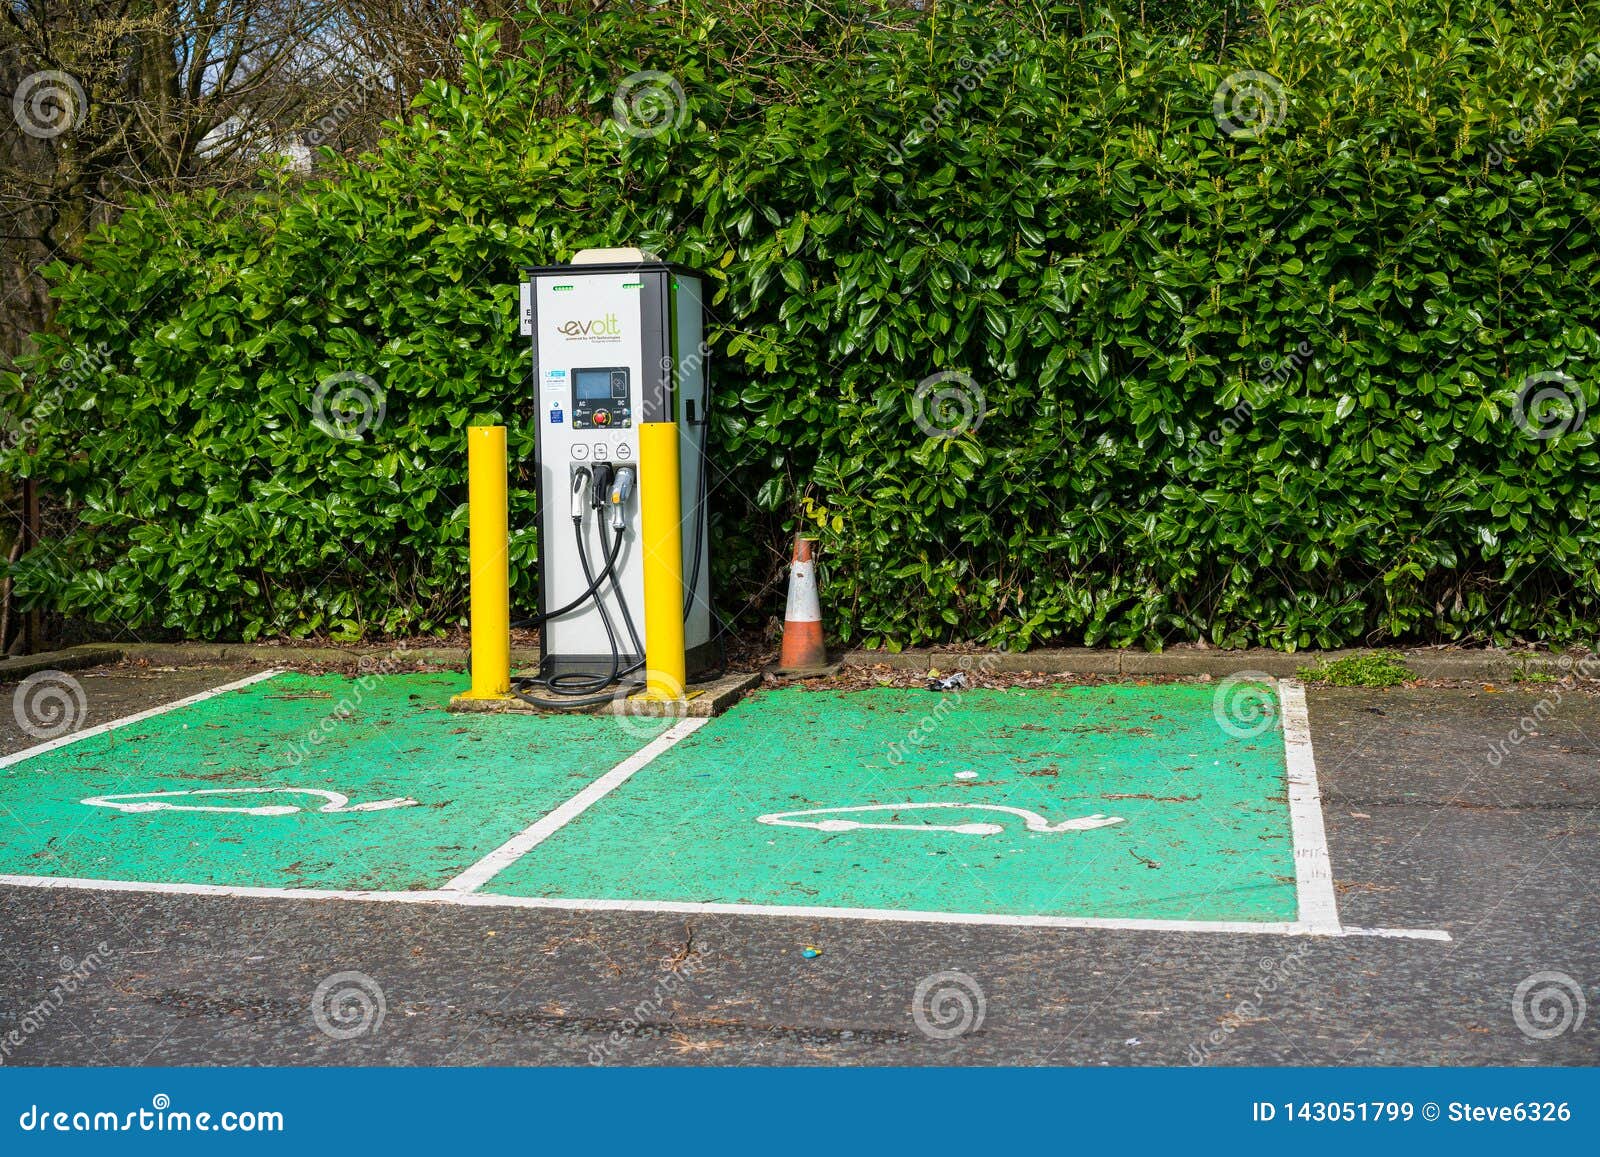 Electric Vehicle Charging Point, Scotland Editorial Stock Image Image